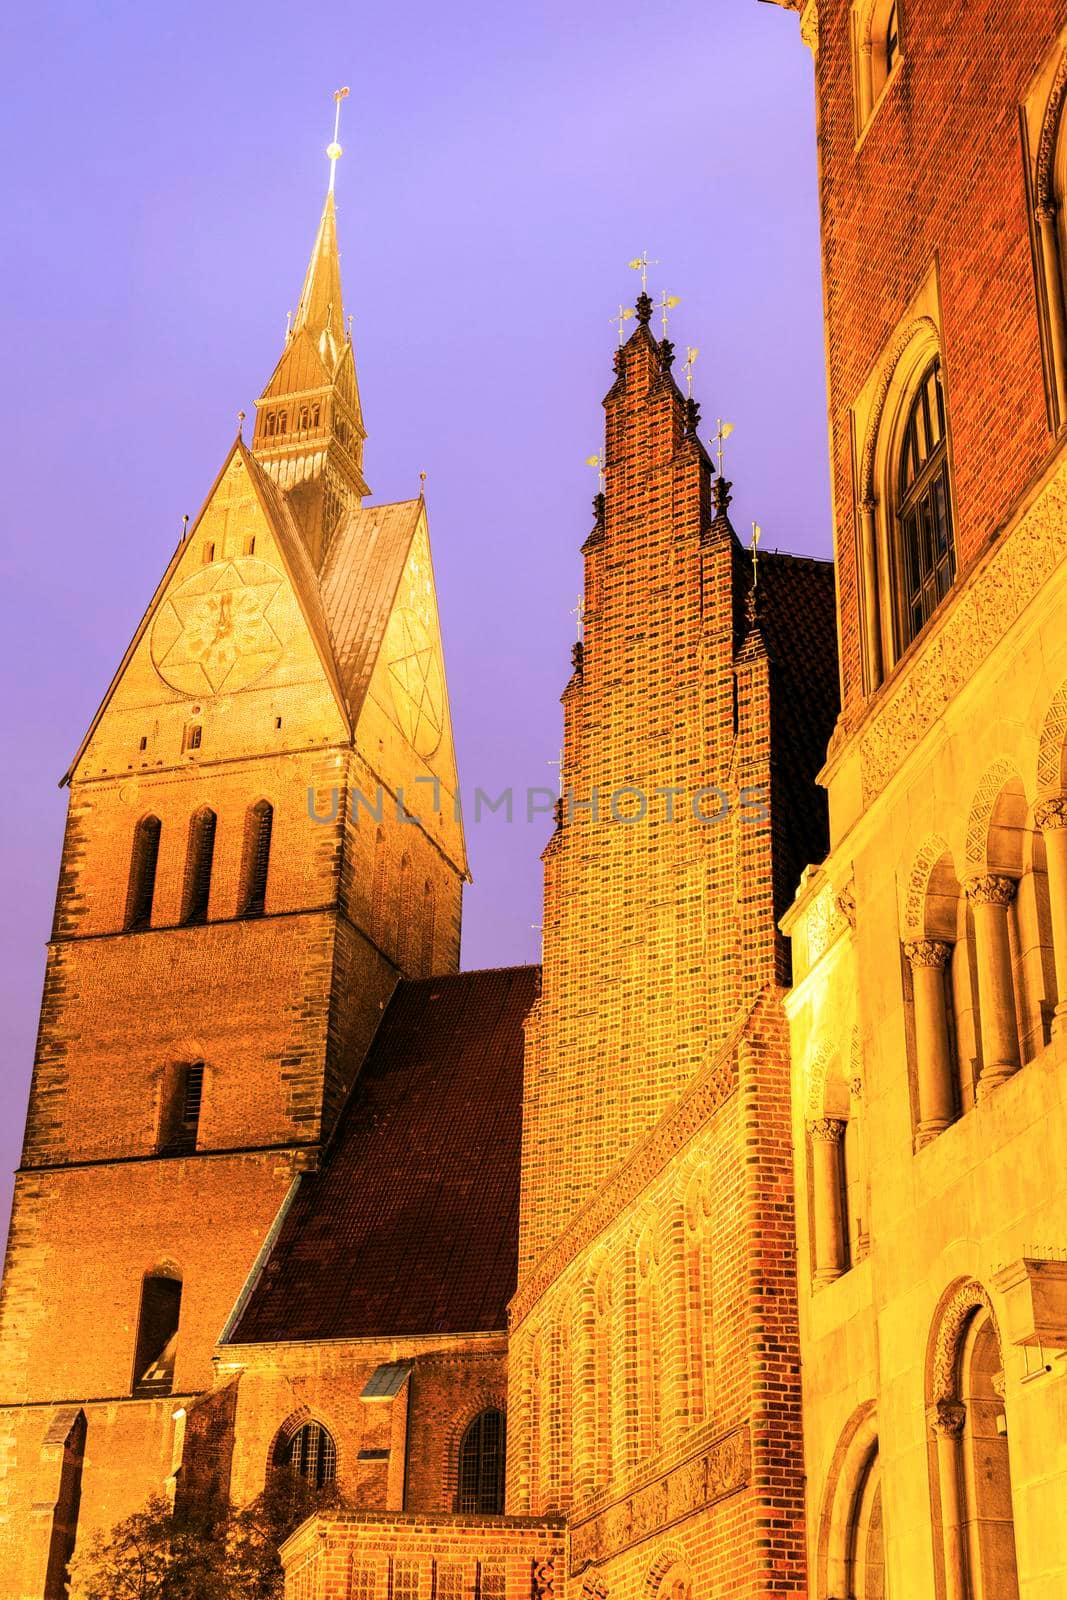 Marktkirche and Old Town Hall in Hanover. Hanover, Lower Saxony, Germany.